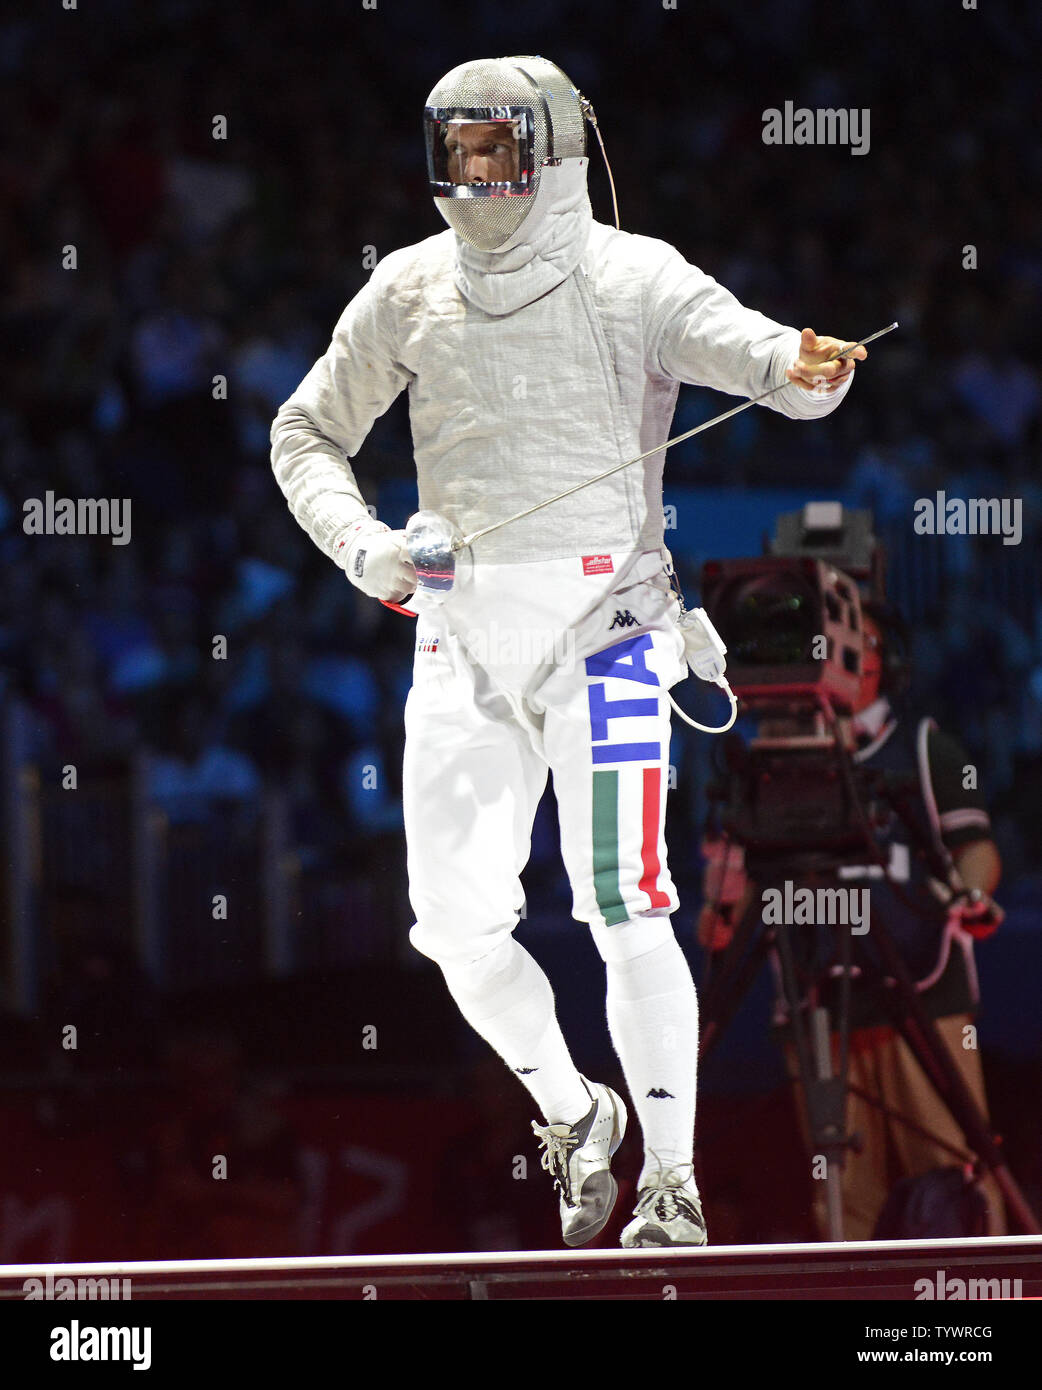 Aldo Montano of Italy, checks his sabre in the Men's Sabre Team Bronze Medal match against Russia at the London 2012 Summer Olympics on August 3, 2012 in London. Italy won the bronze 45 - 40.  UPI/Ron Sachs Stock Photo